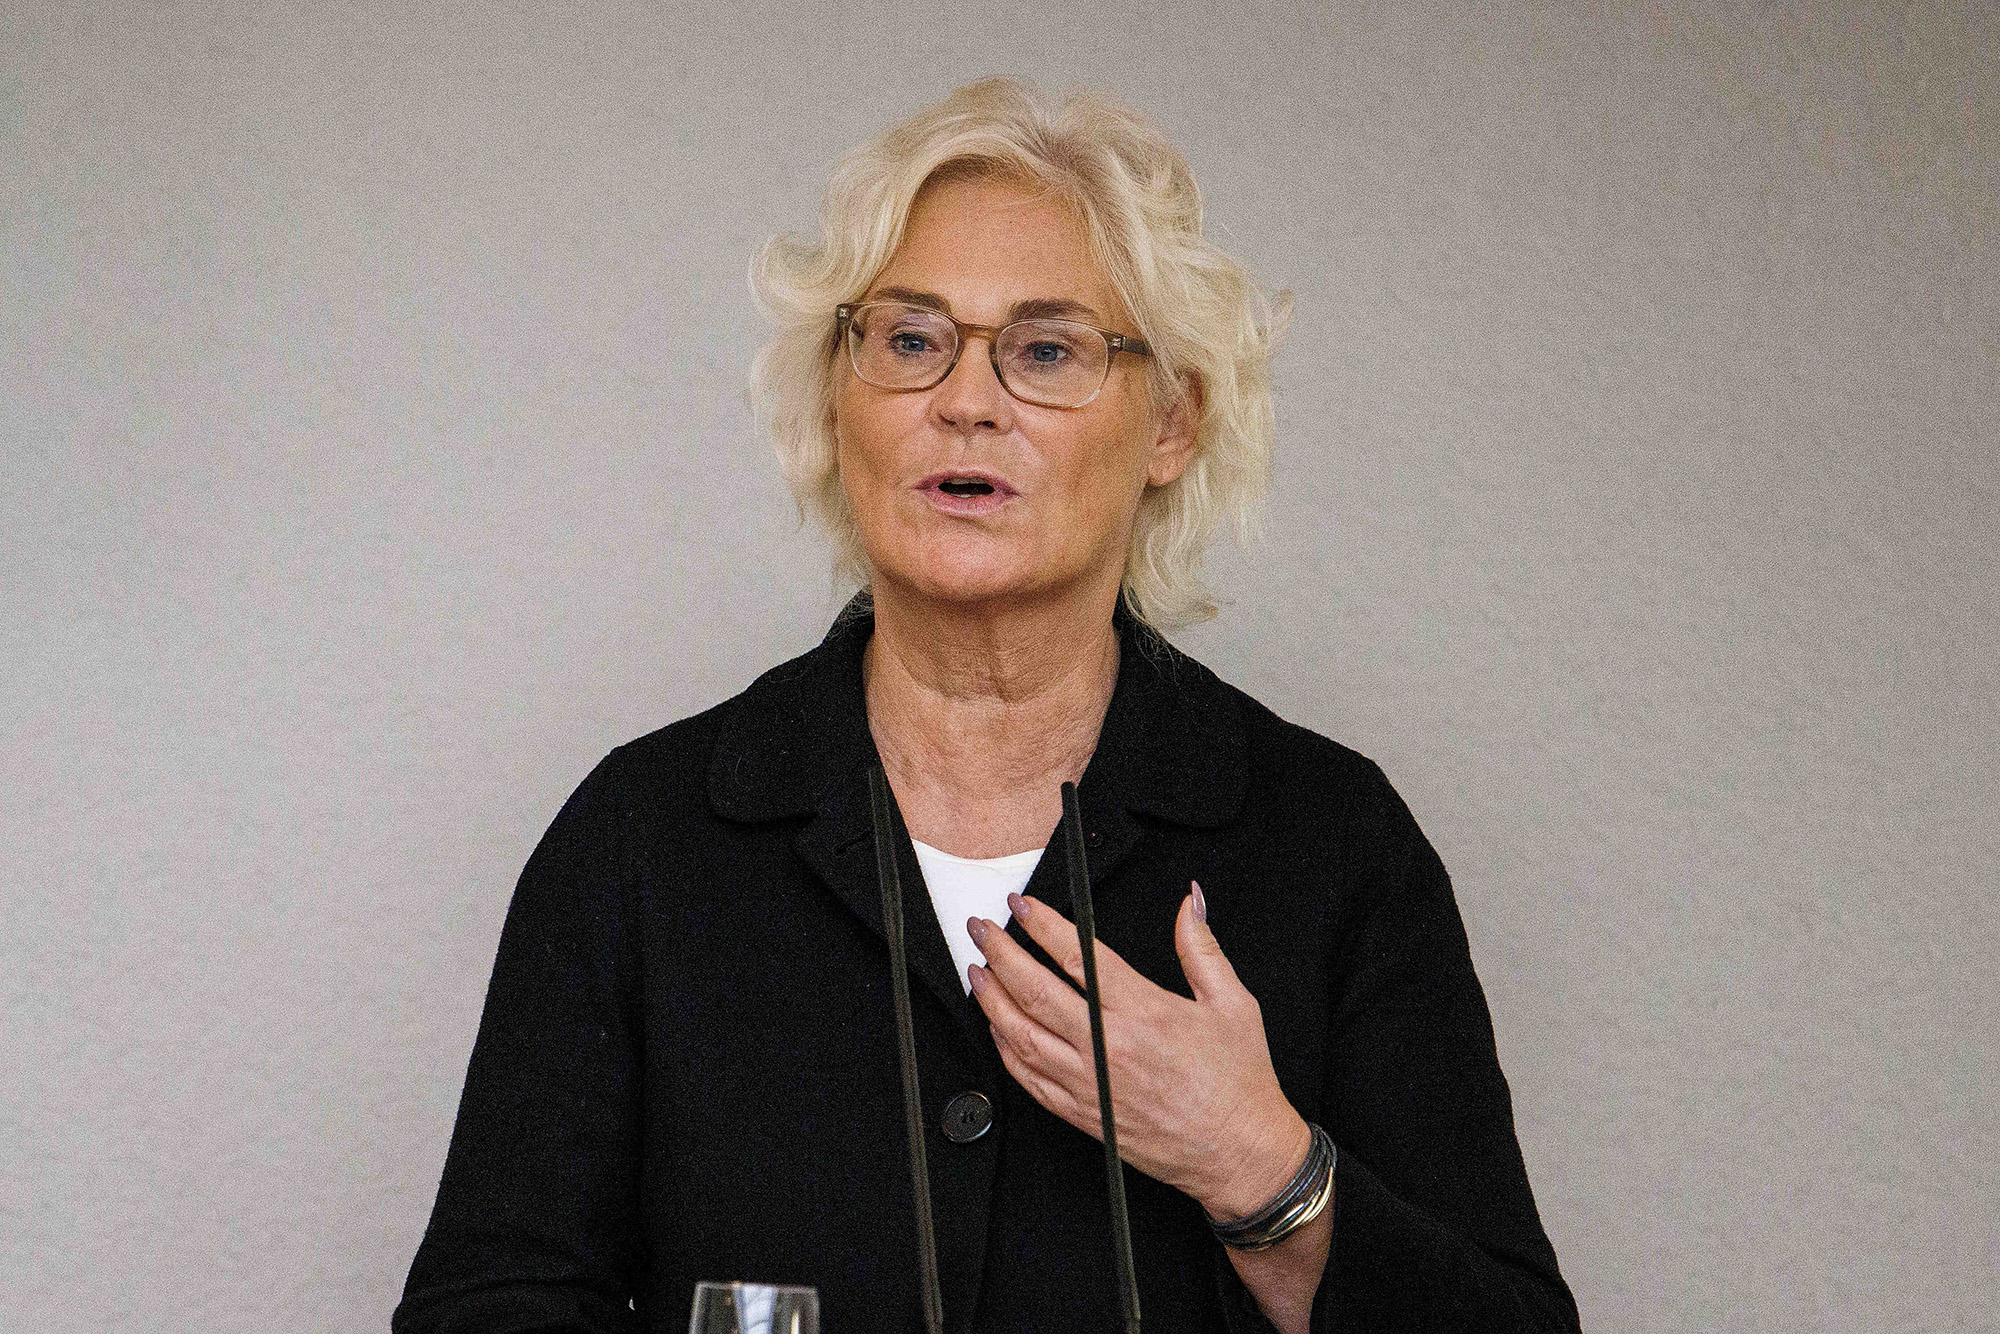 Christine Lambrecht, Minister of Defense, gives a press conference in Berlin, Germany, on September 22.